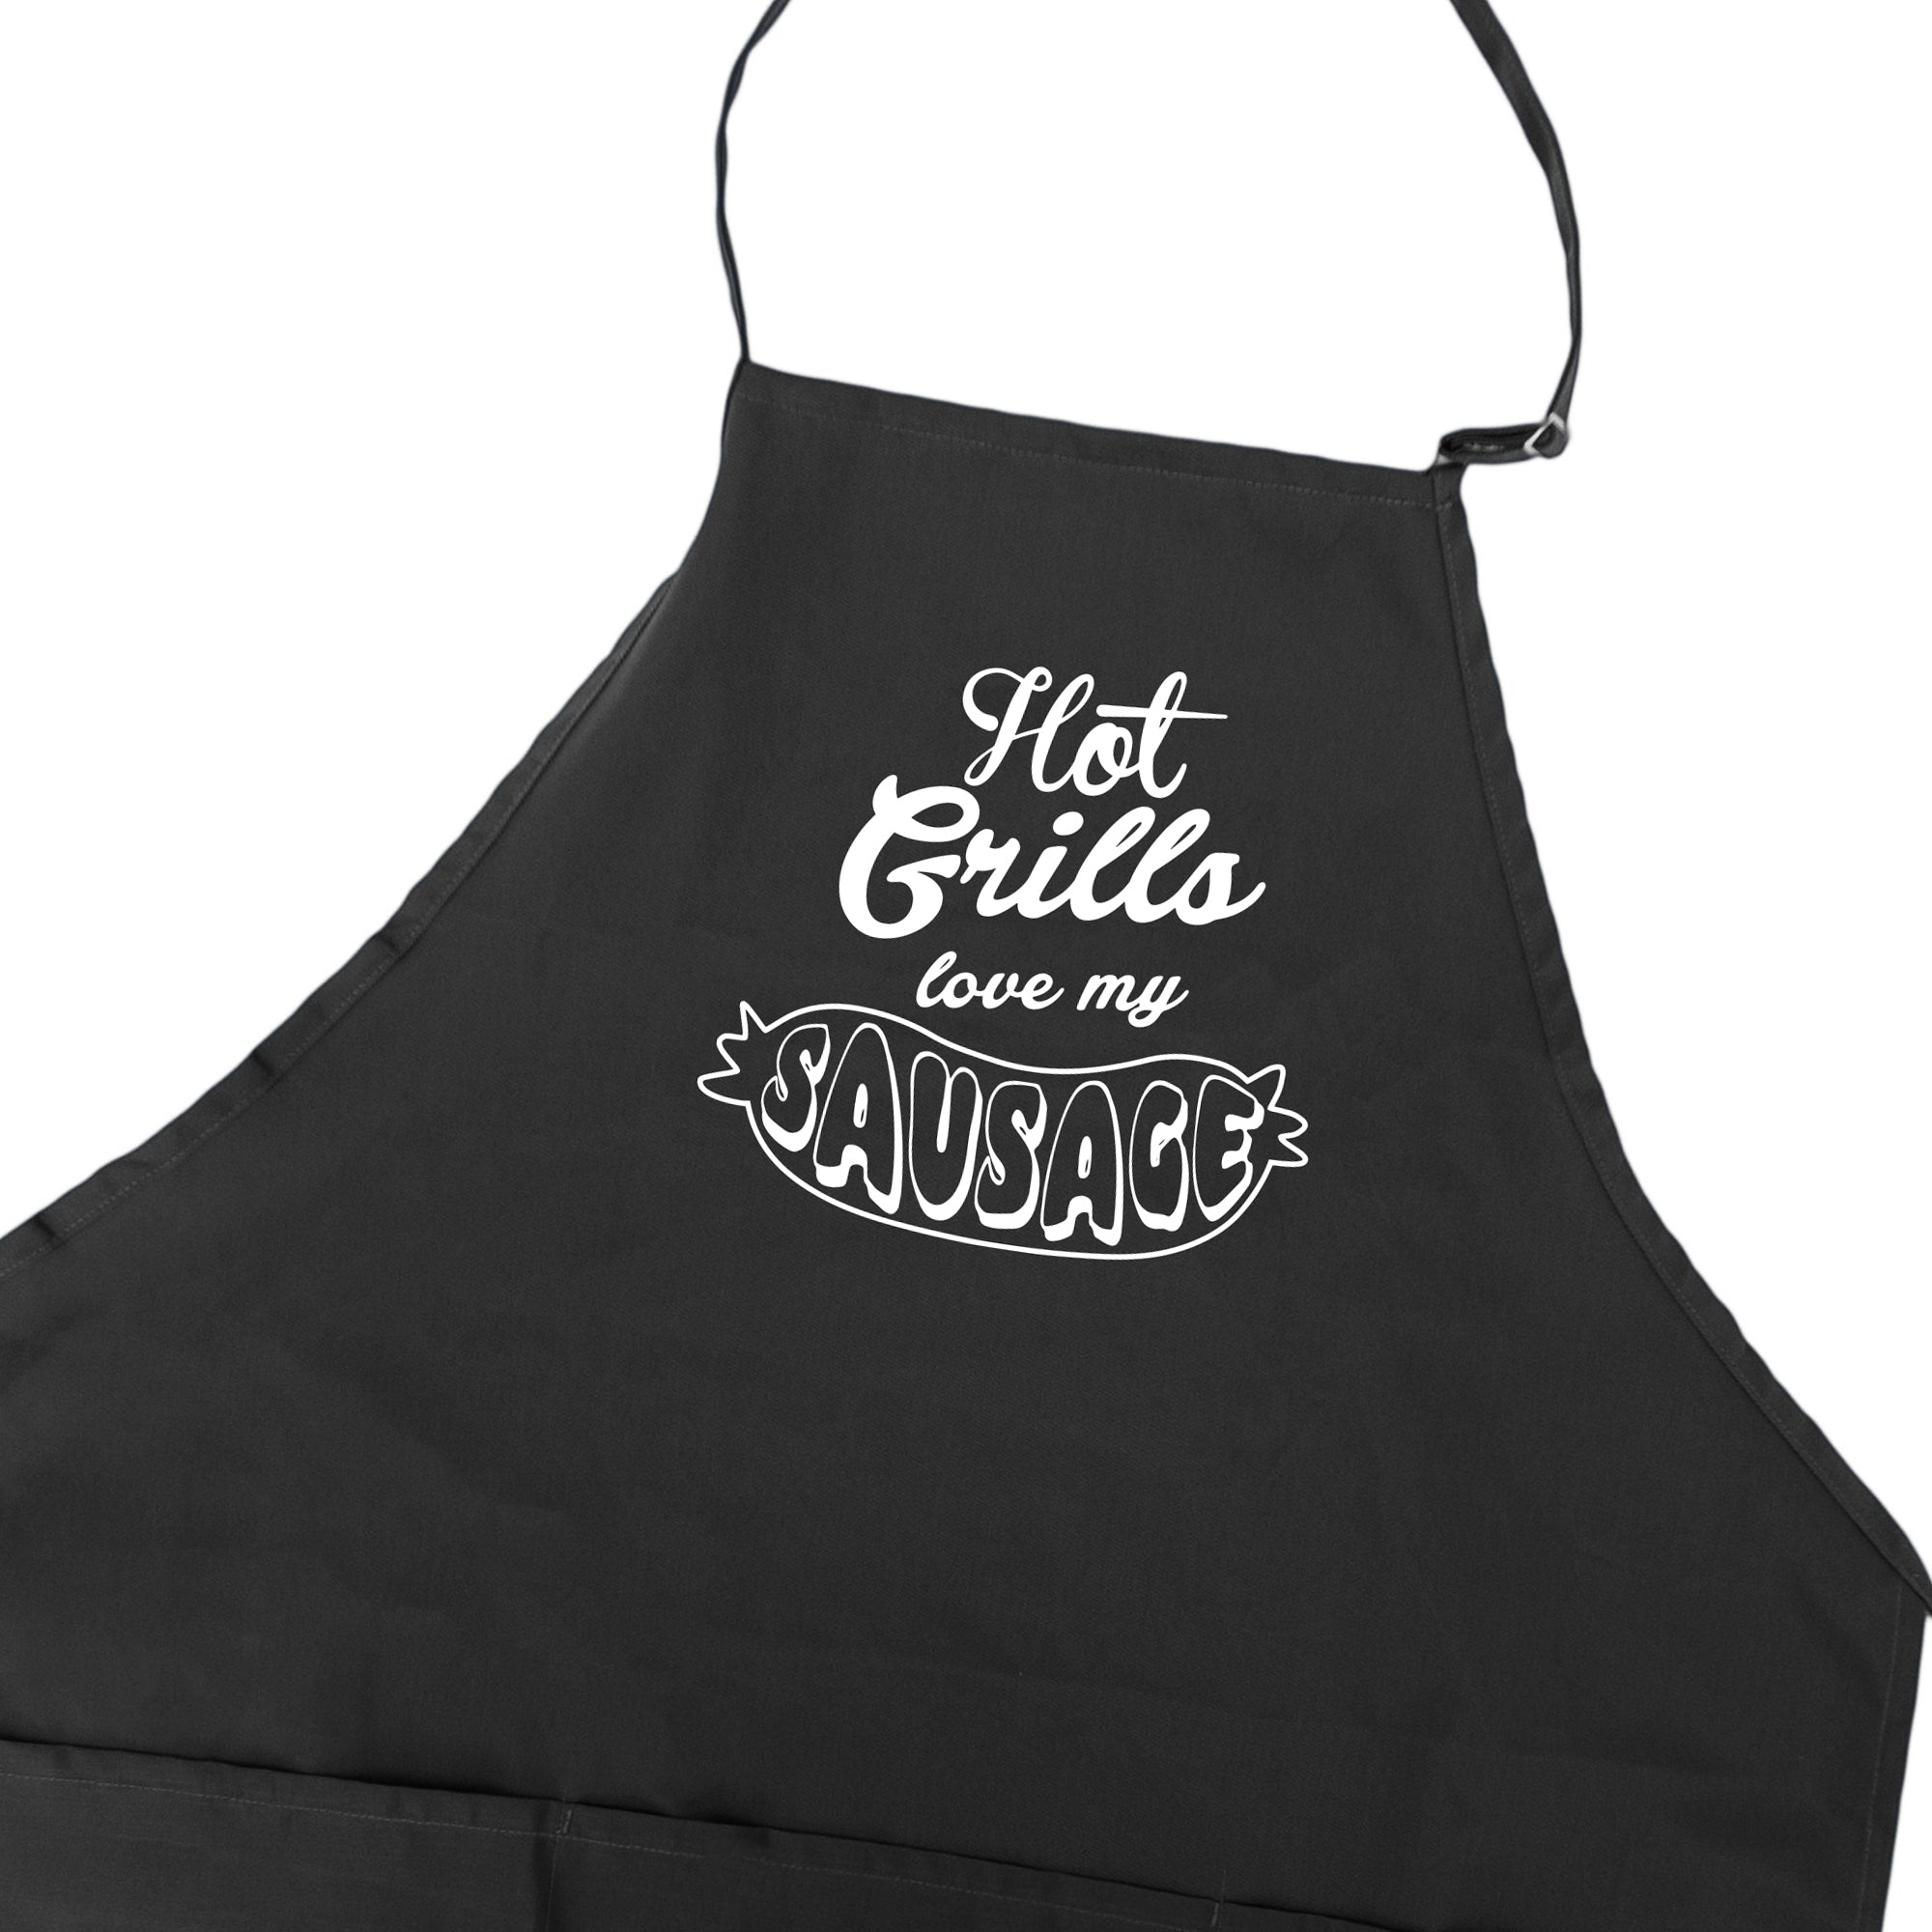 Funny Meat Grill Shirts, Bbq Smoker Grill Gifts, Grilling Gifts